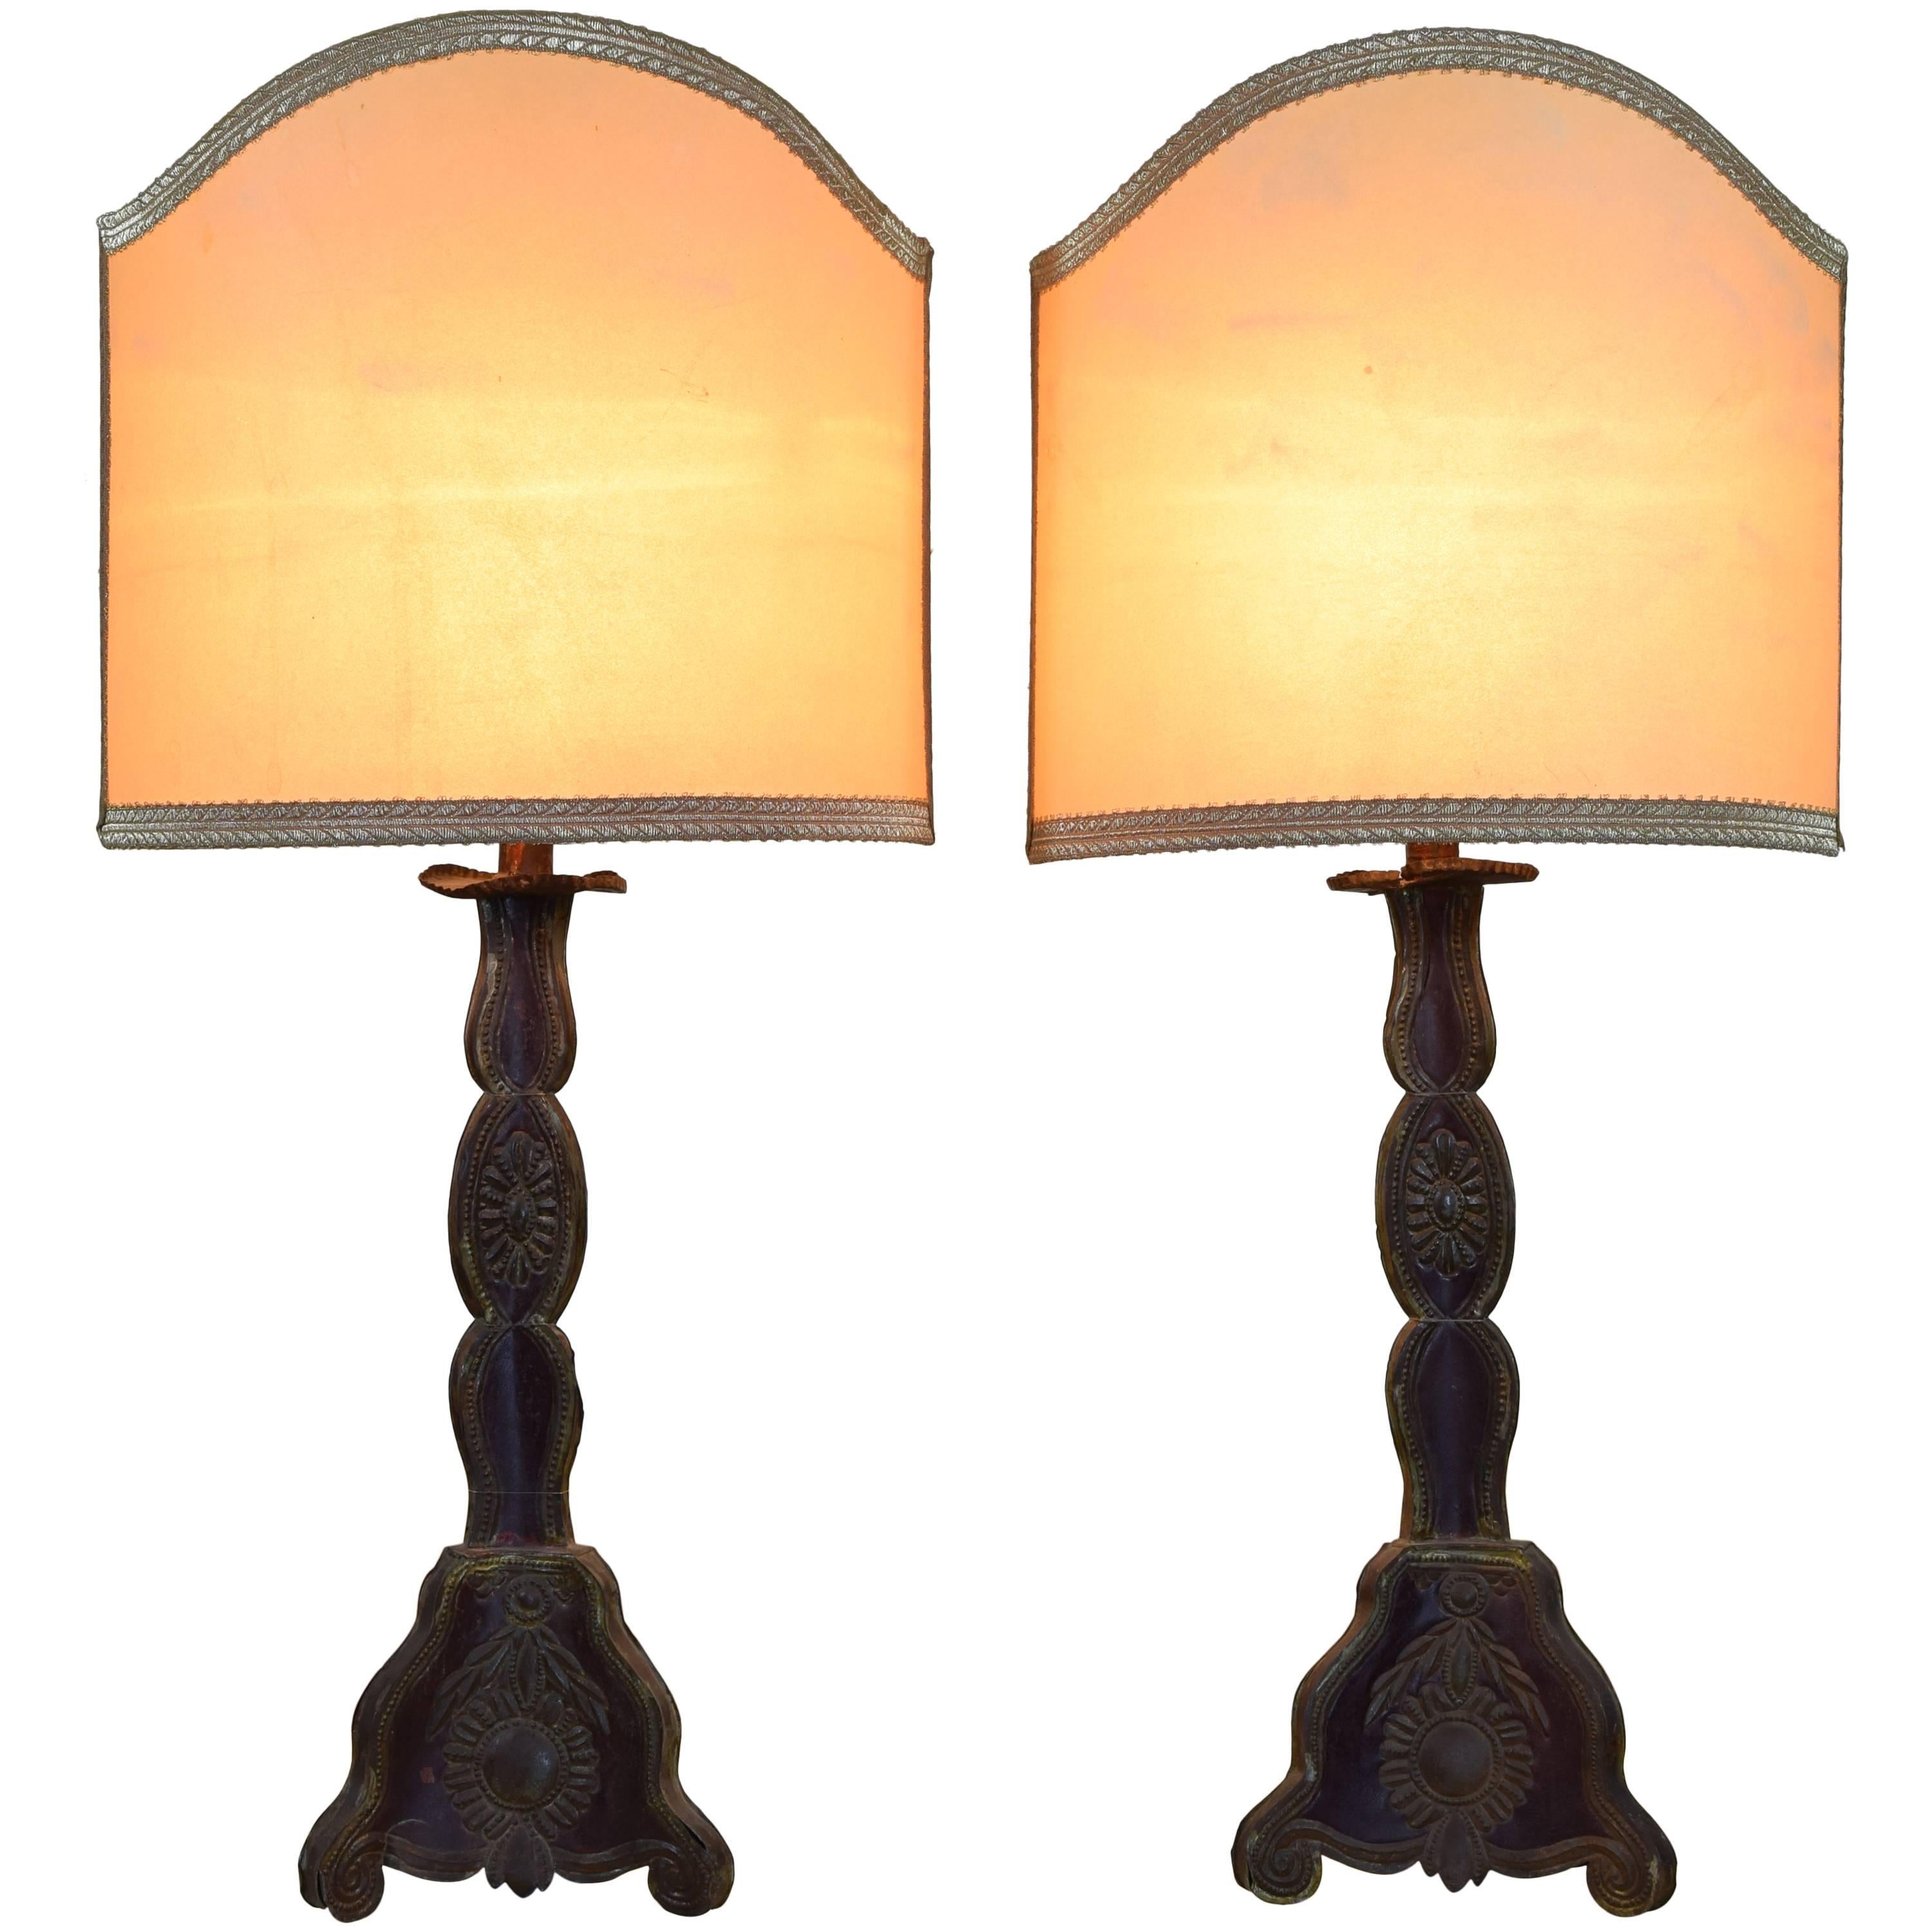 Sicilian Painted Tole Candlesticks Mounted as Table Lamps Pair 18th-19th Century